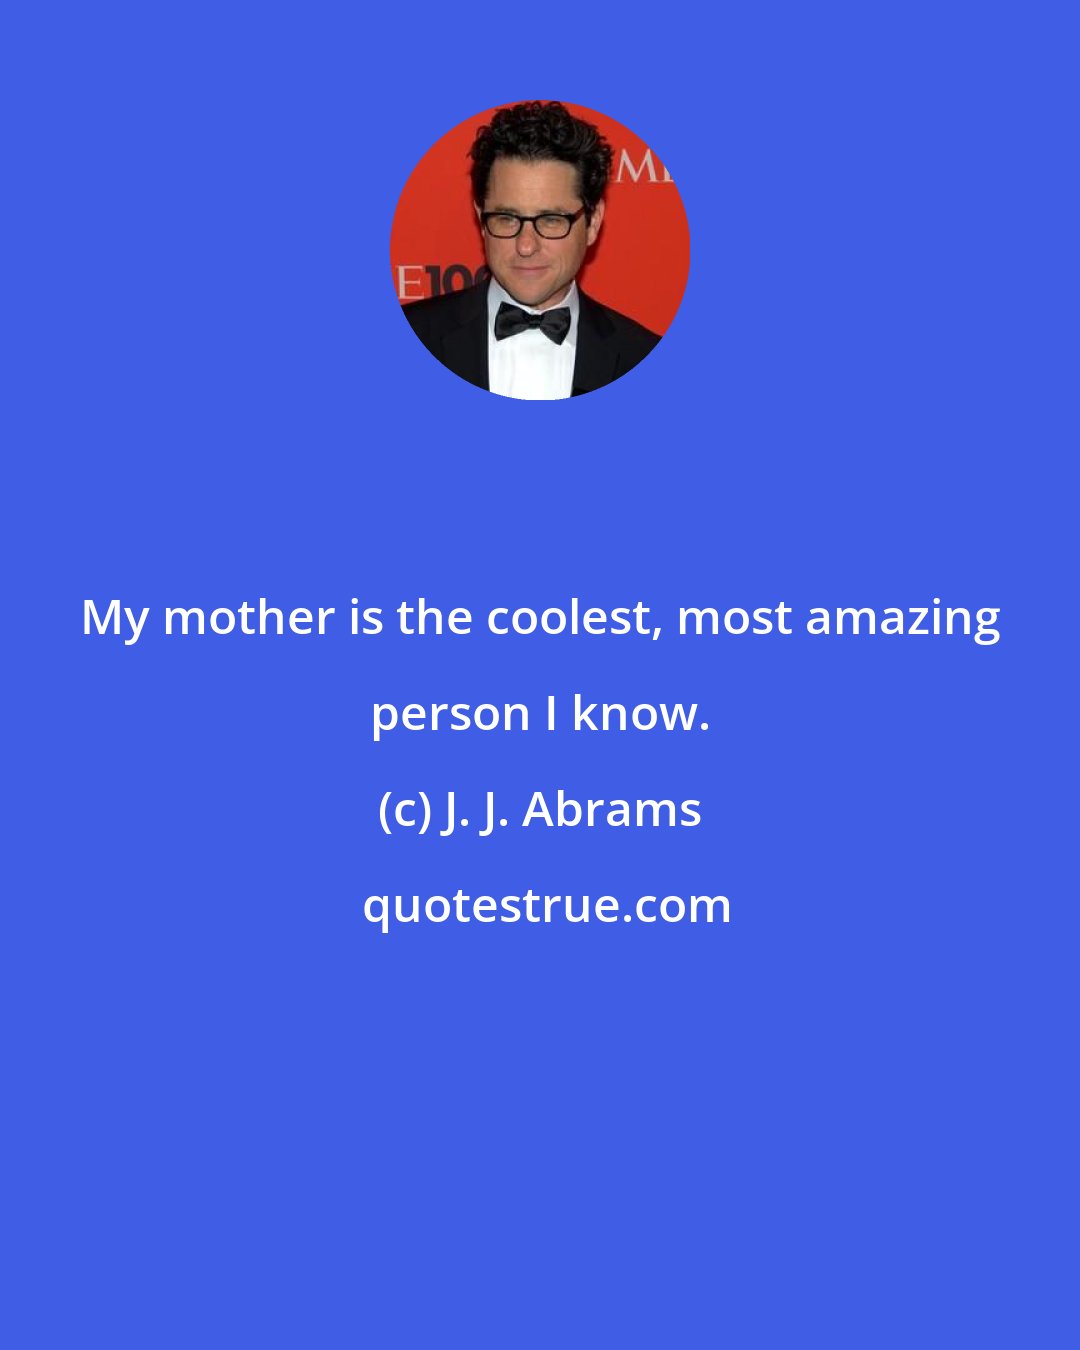 J. J. Abrams: My mother is the coolest, most amazing person I know.